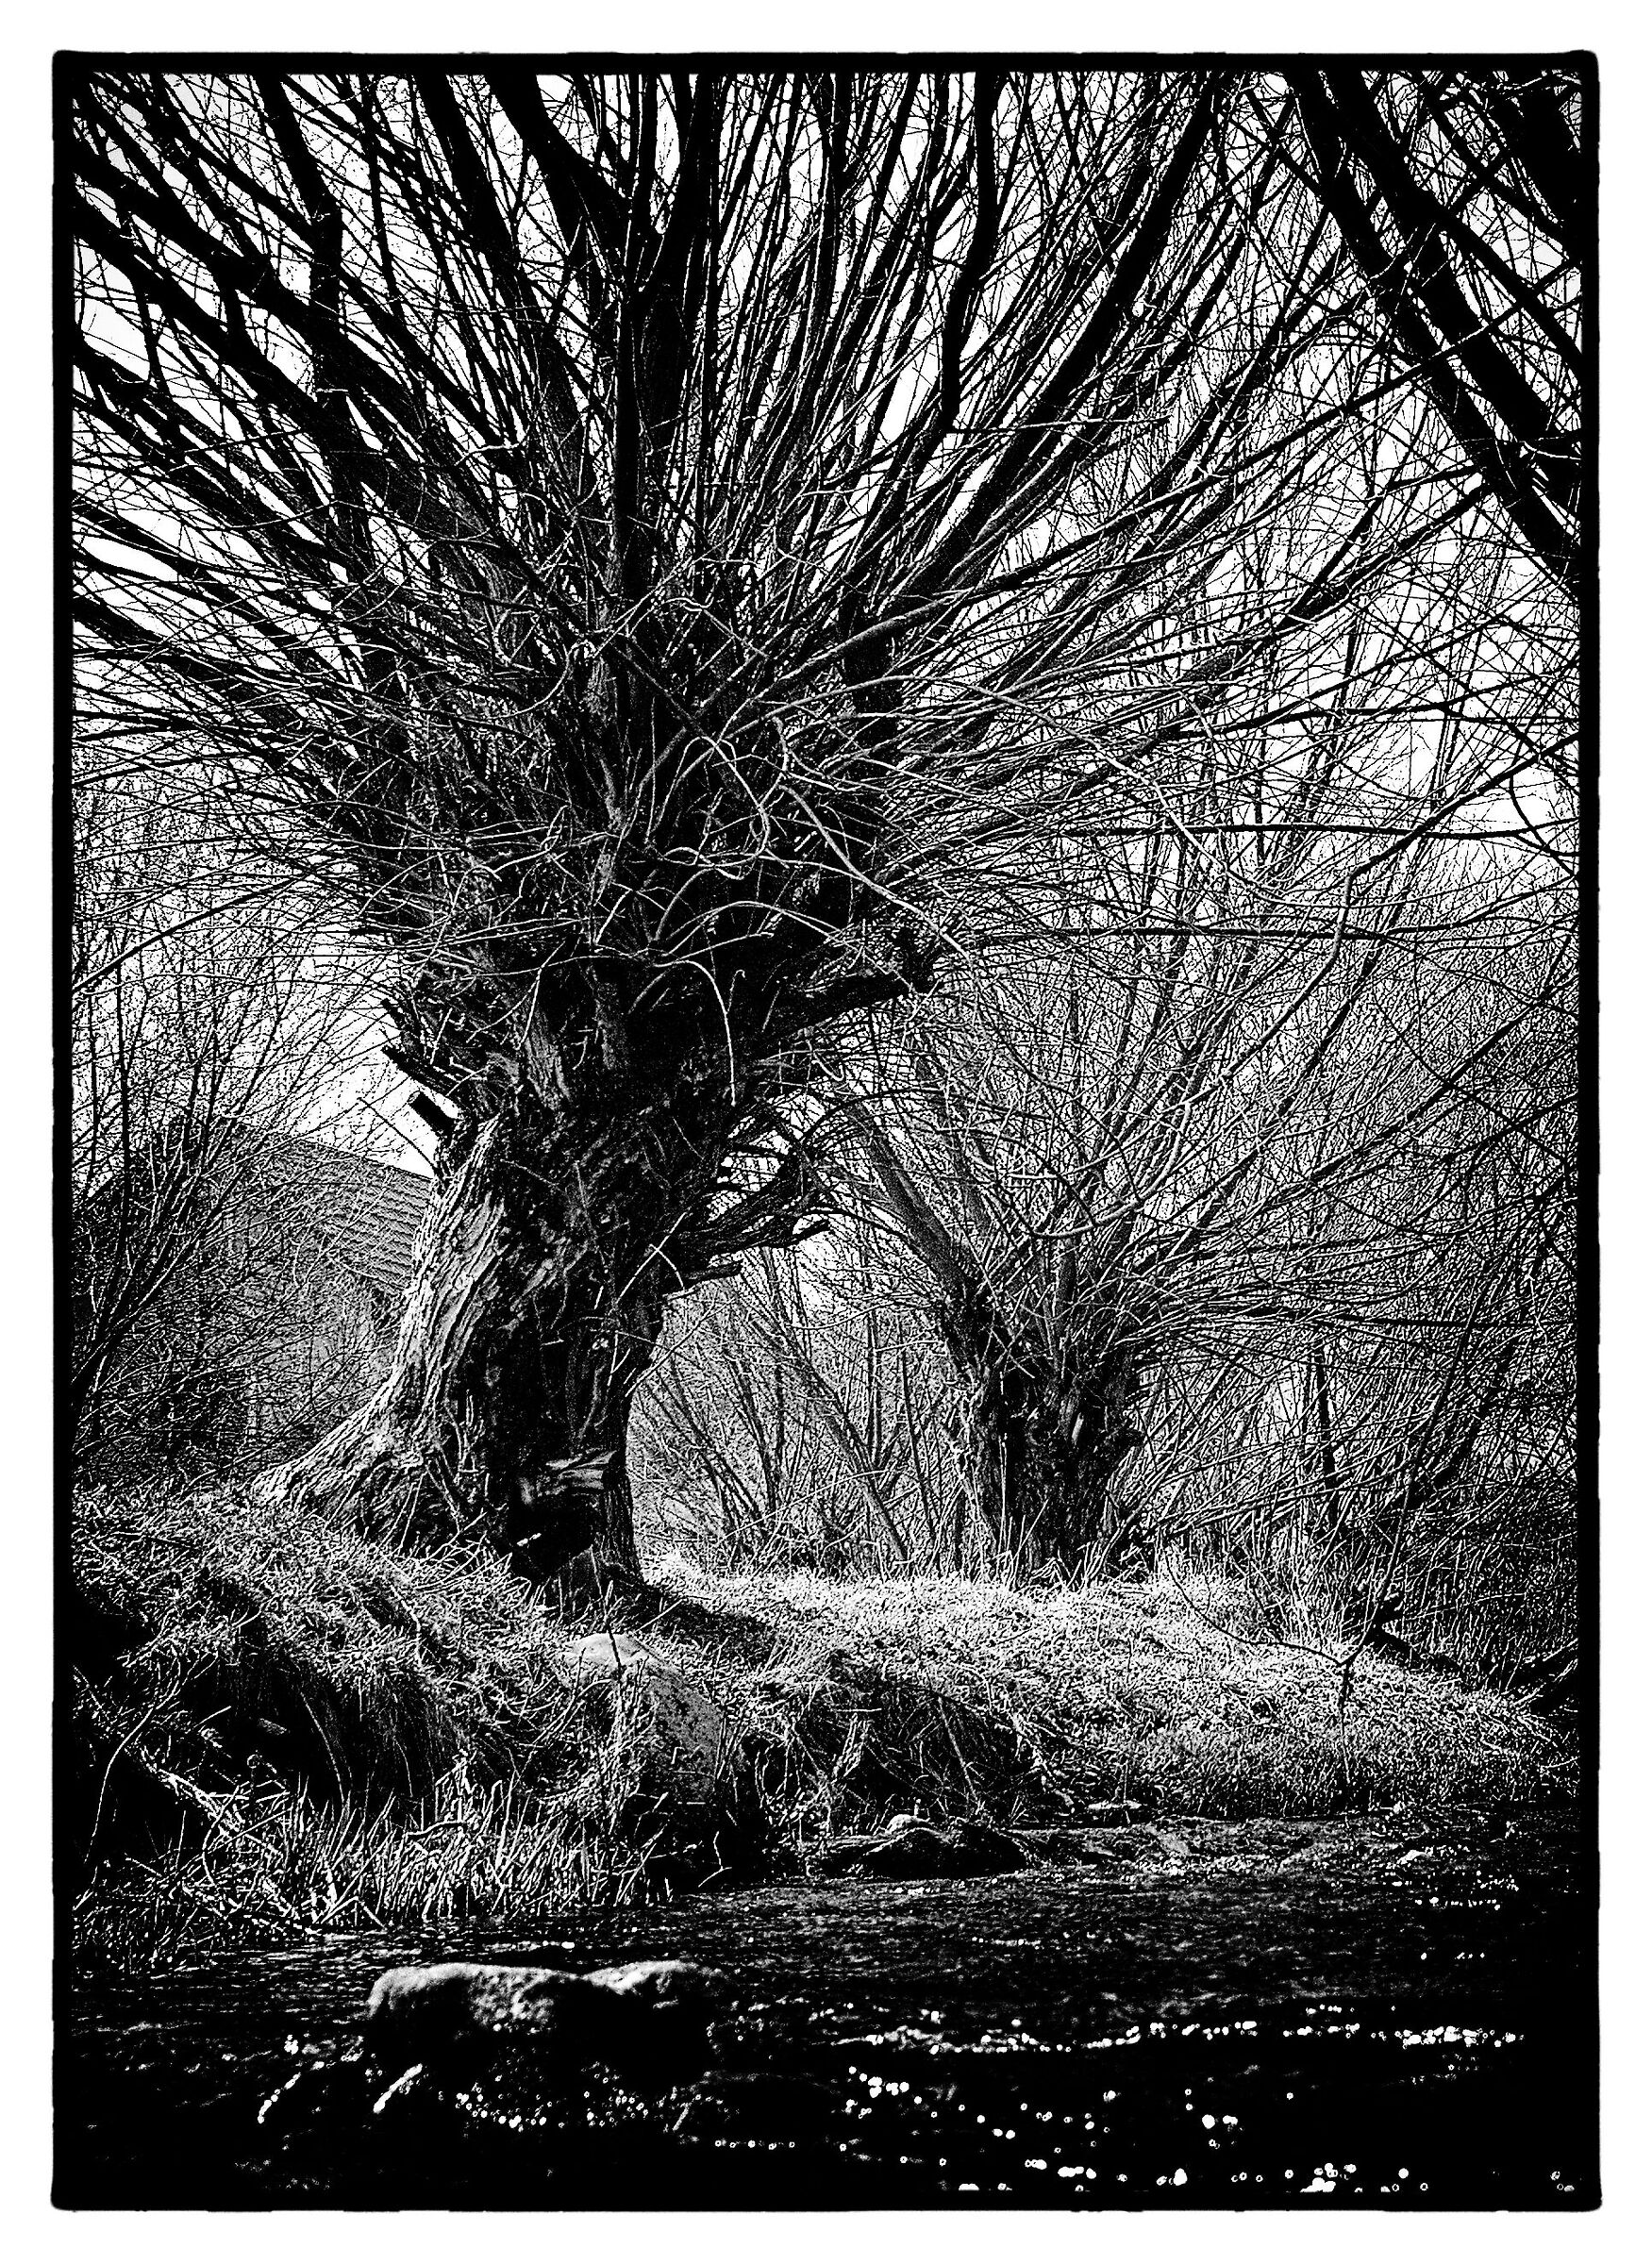 Willow - black and white...